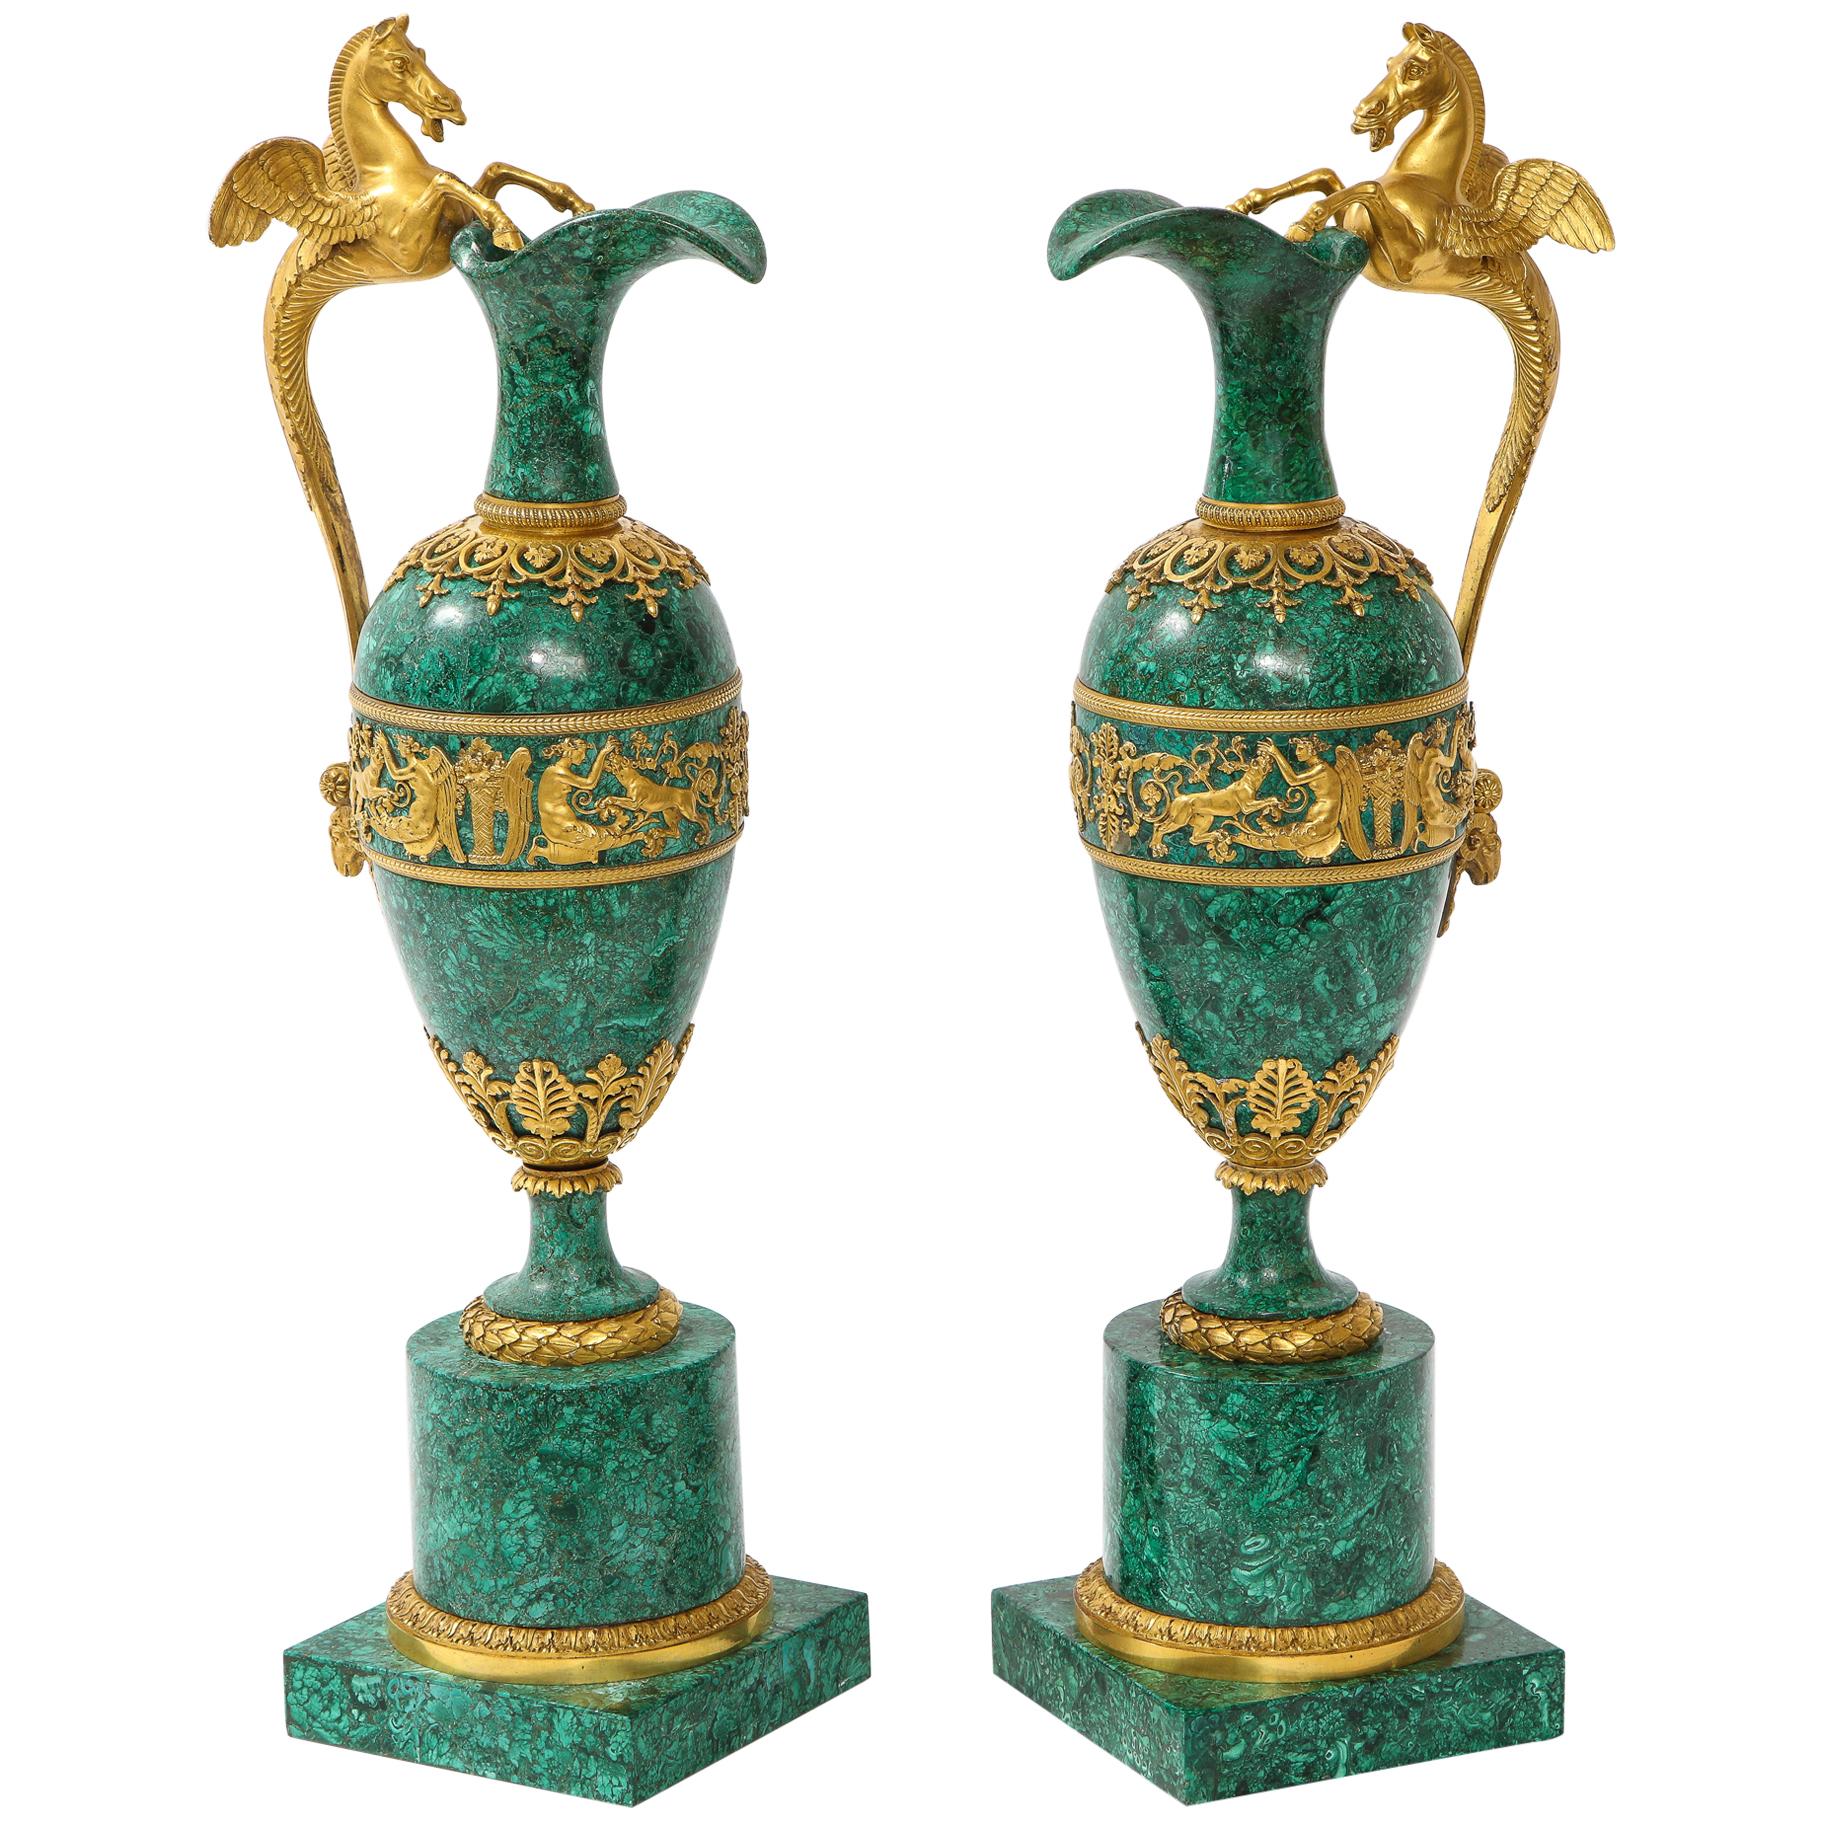 Empire Ormolu-Mounted Malachite Ewers Attributed to Claude Galle, Russian, Pair